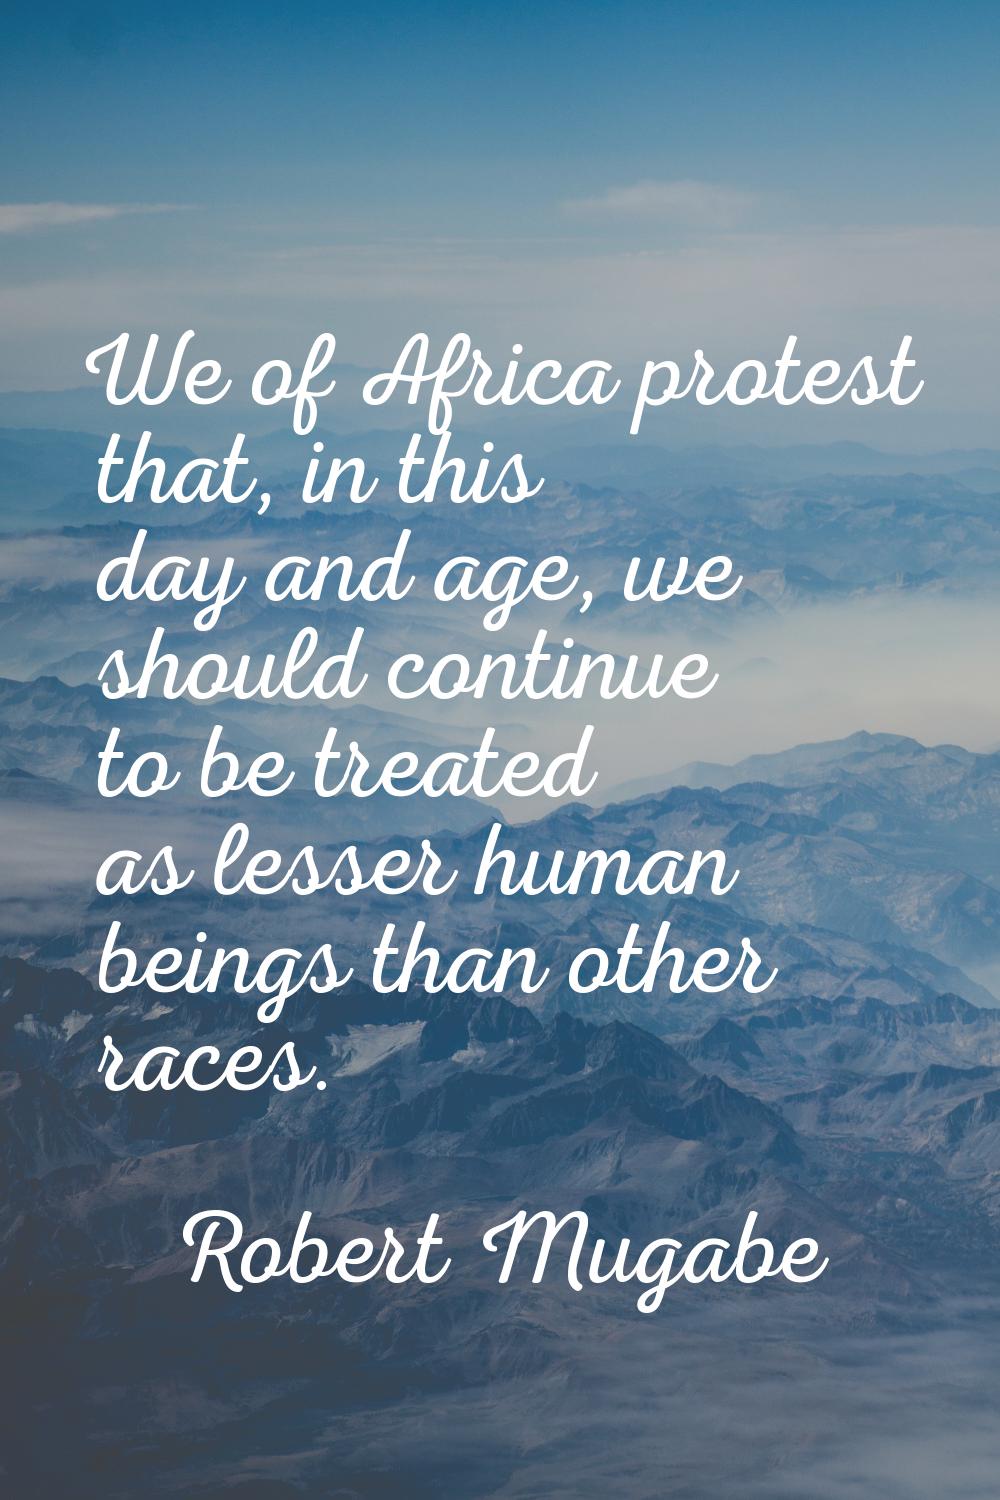 We of Africa protest that, in this day and age, we should continue to be treated as lesser human be